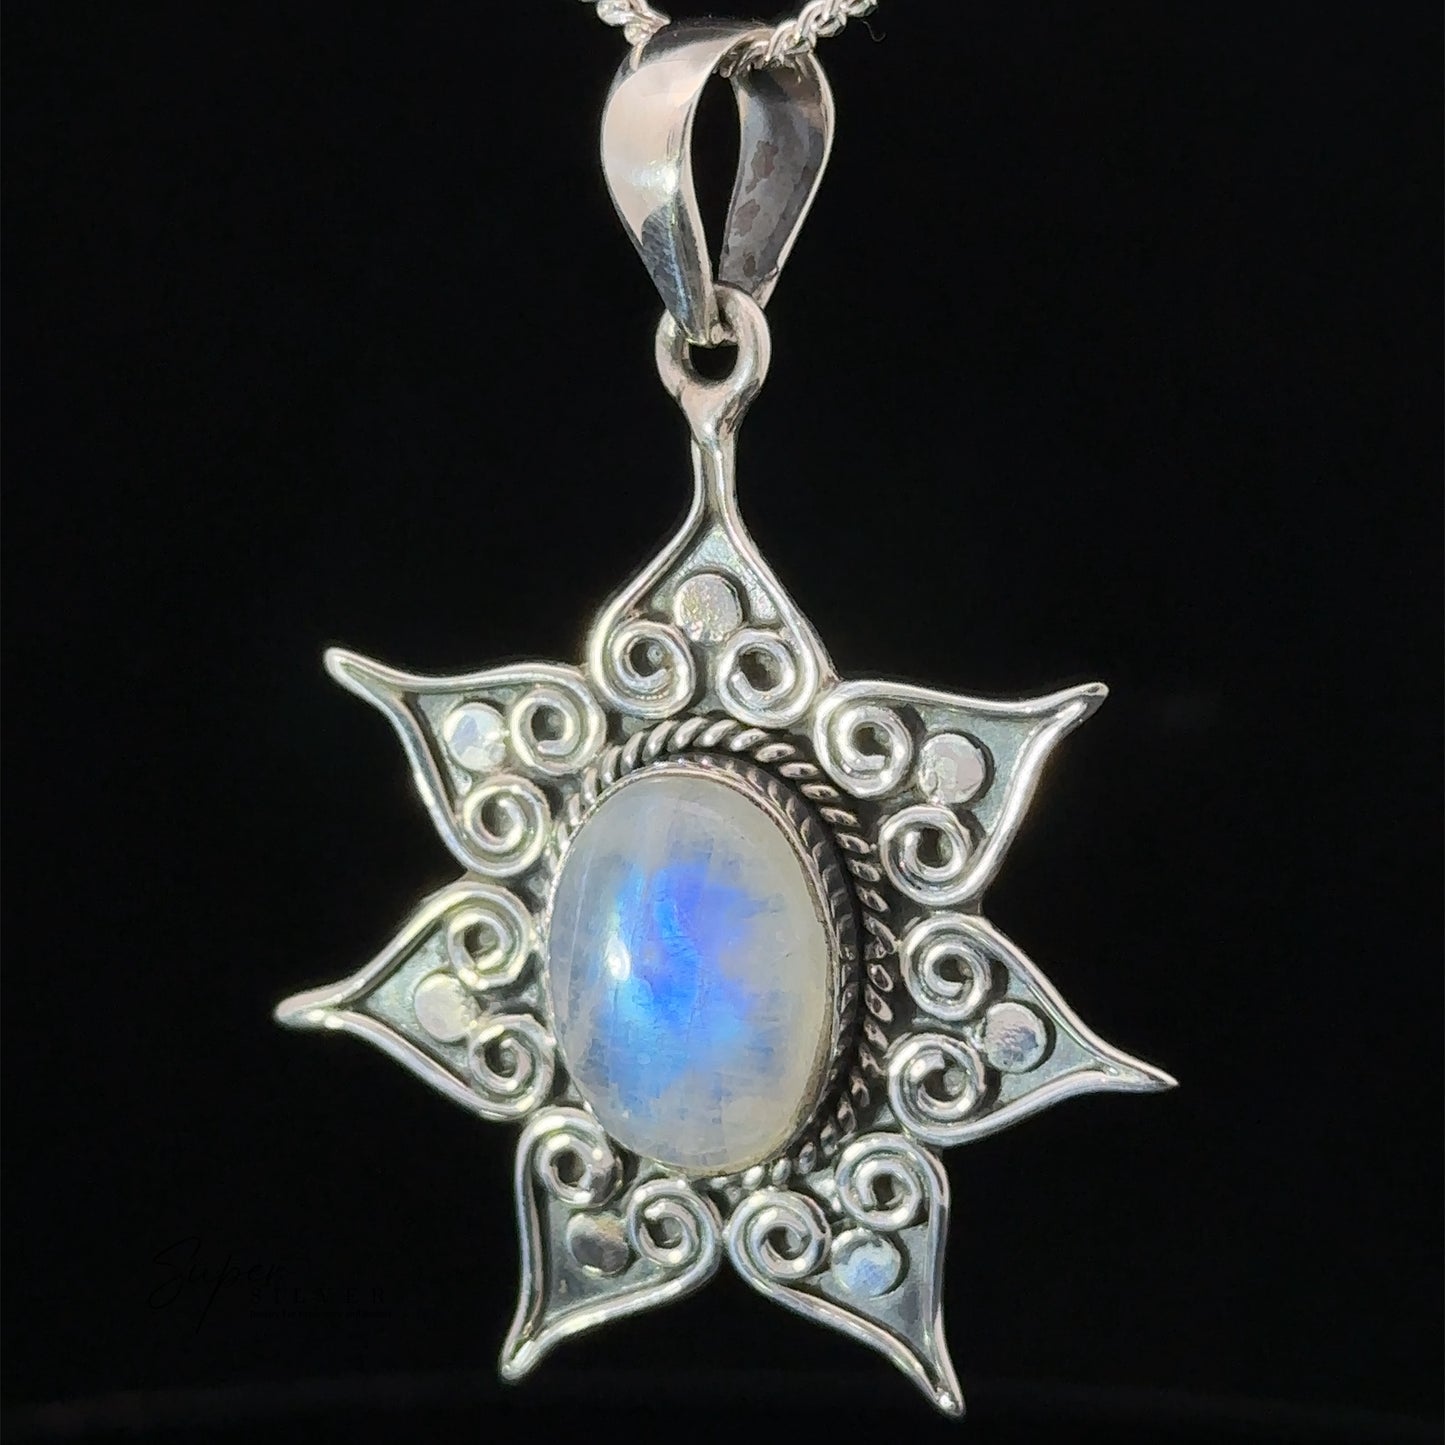 A Floral Design Gemstone Pendant with intricate swirls and a central oval moonstone, hanging on a sterling silver chain. This enchanting piece of moonstone jewelry also features a delicate flower star setting for added charm.